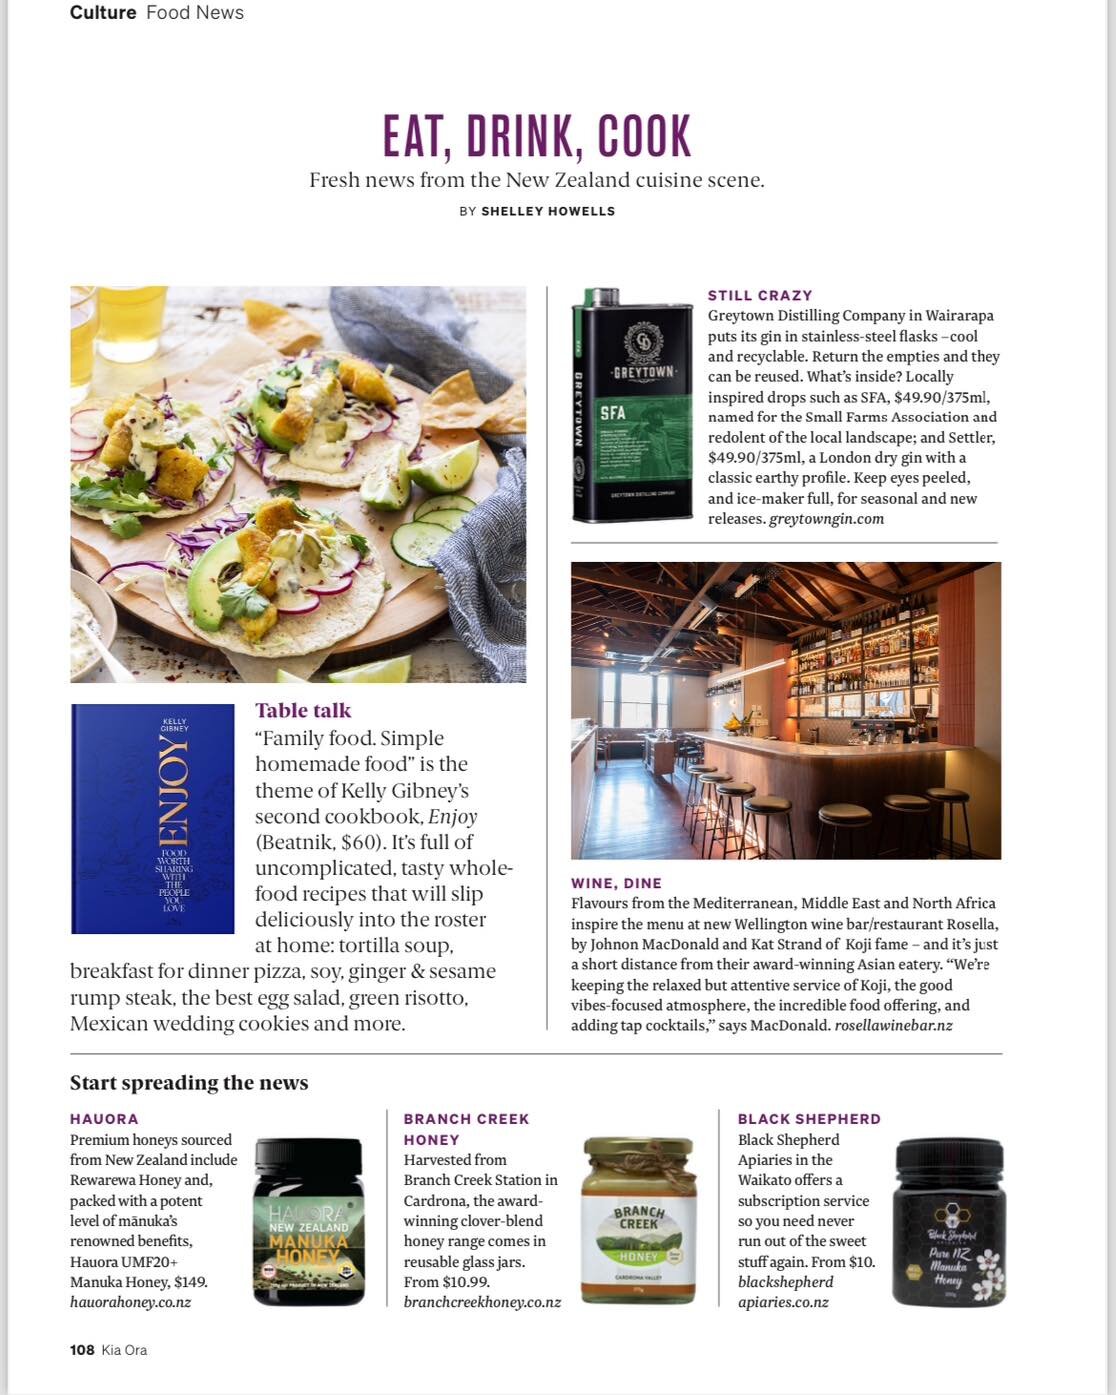 If you&rsquo;re heading on a flight with Air New Zealand soon be sure to keep an eye out for us in the Kia Ora magazine! ✈️ 
You&rsquo;ll find us in the January edition of Eat, Drink, Cook by Shelley Howells 

Thanks Shelley and Kia Ora mag for the f